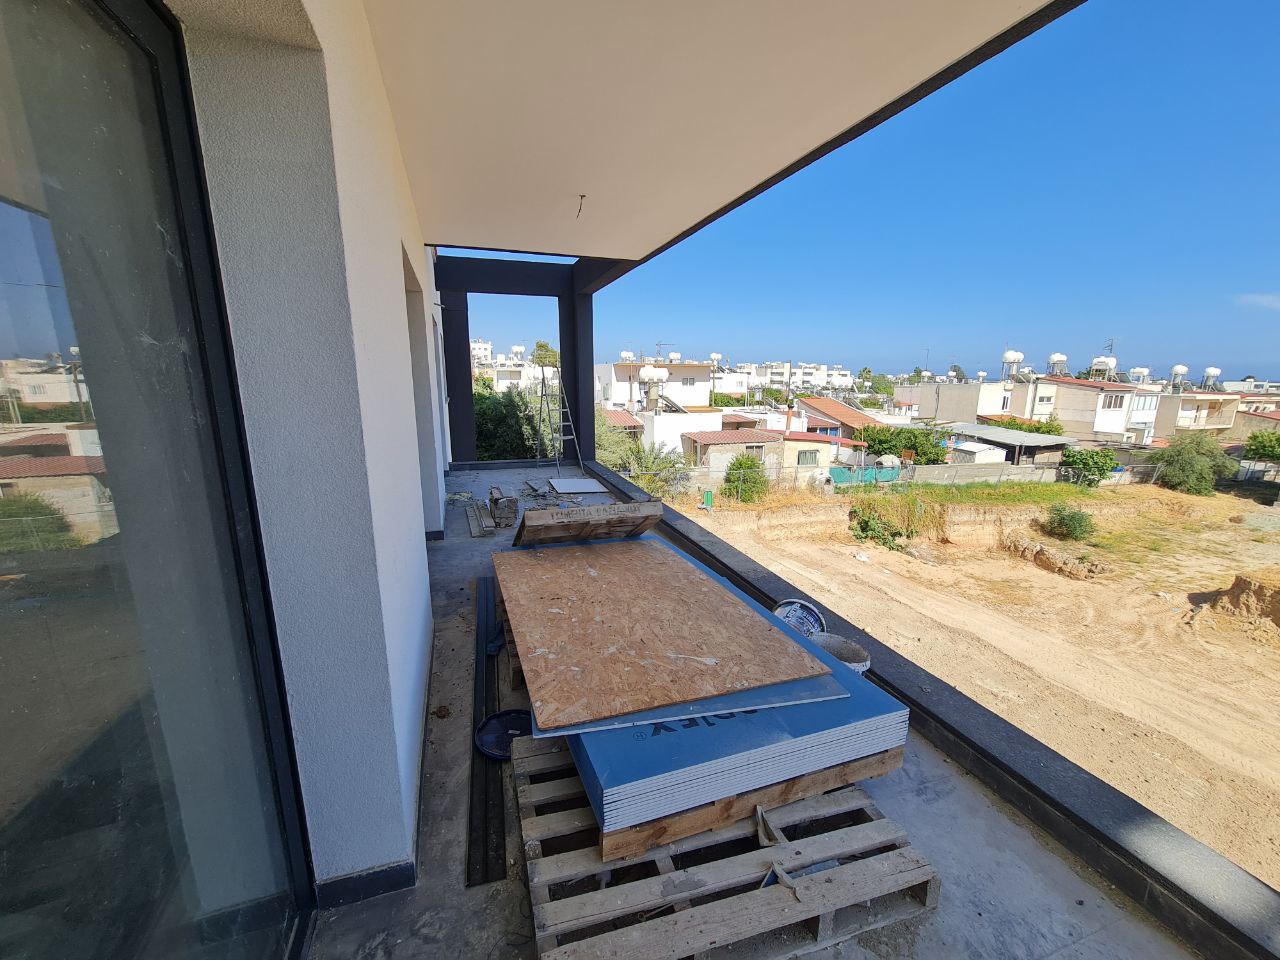 2 Bedroom Apartment for Sale in Limassol – Linopetra